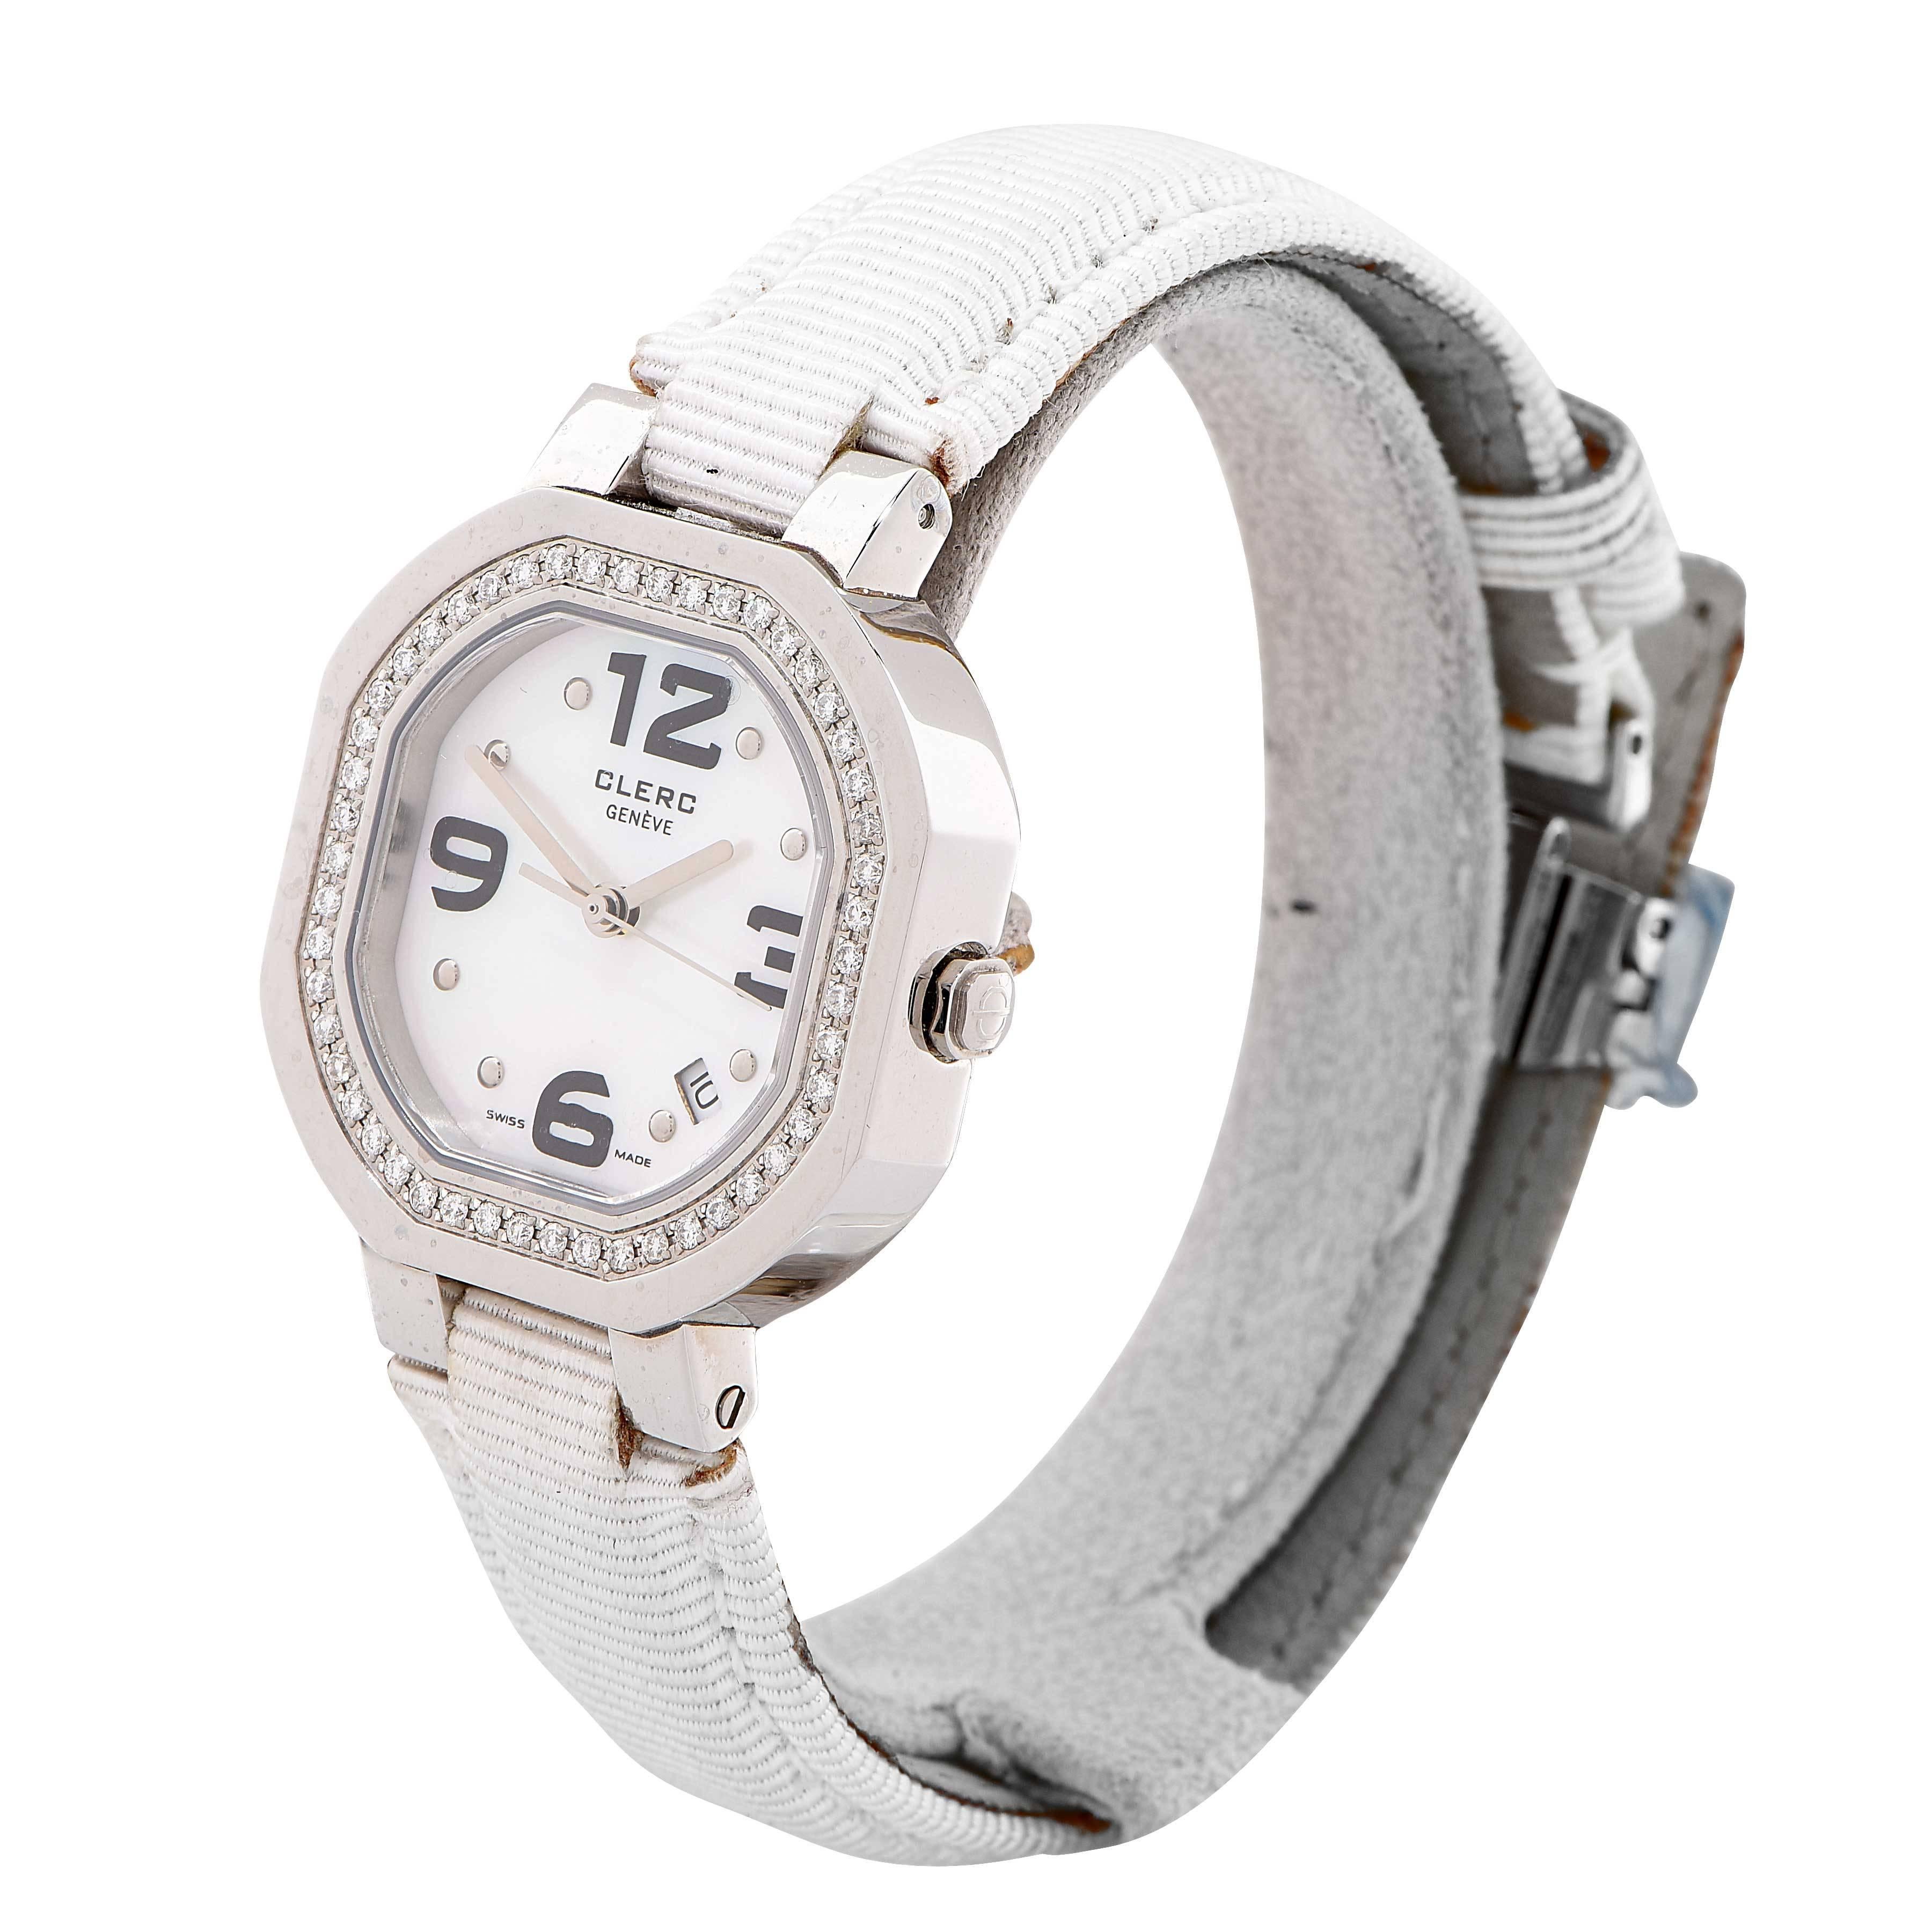 Clerc Lady's Watch with Mother of Pearl Dial, Diamond Bezel, Stainless Steel Case.
Model #: CID-SS1
Original Retail: $2,590.00

